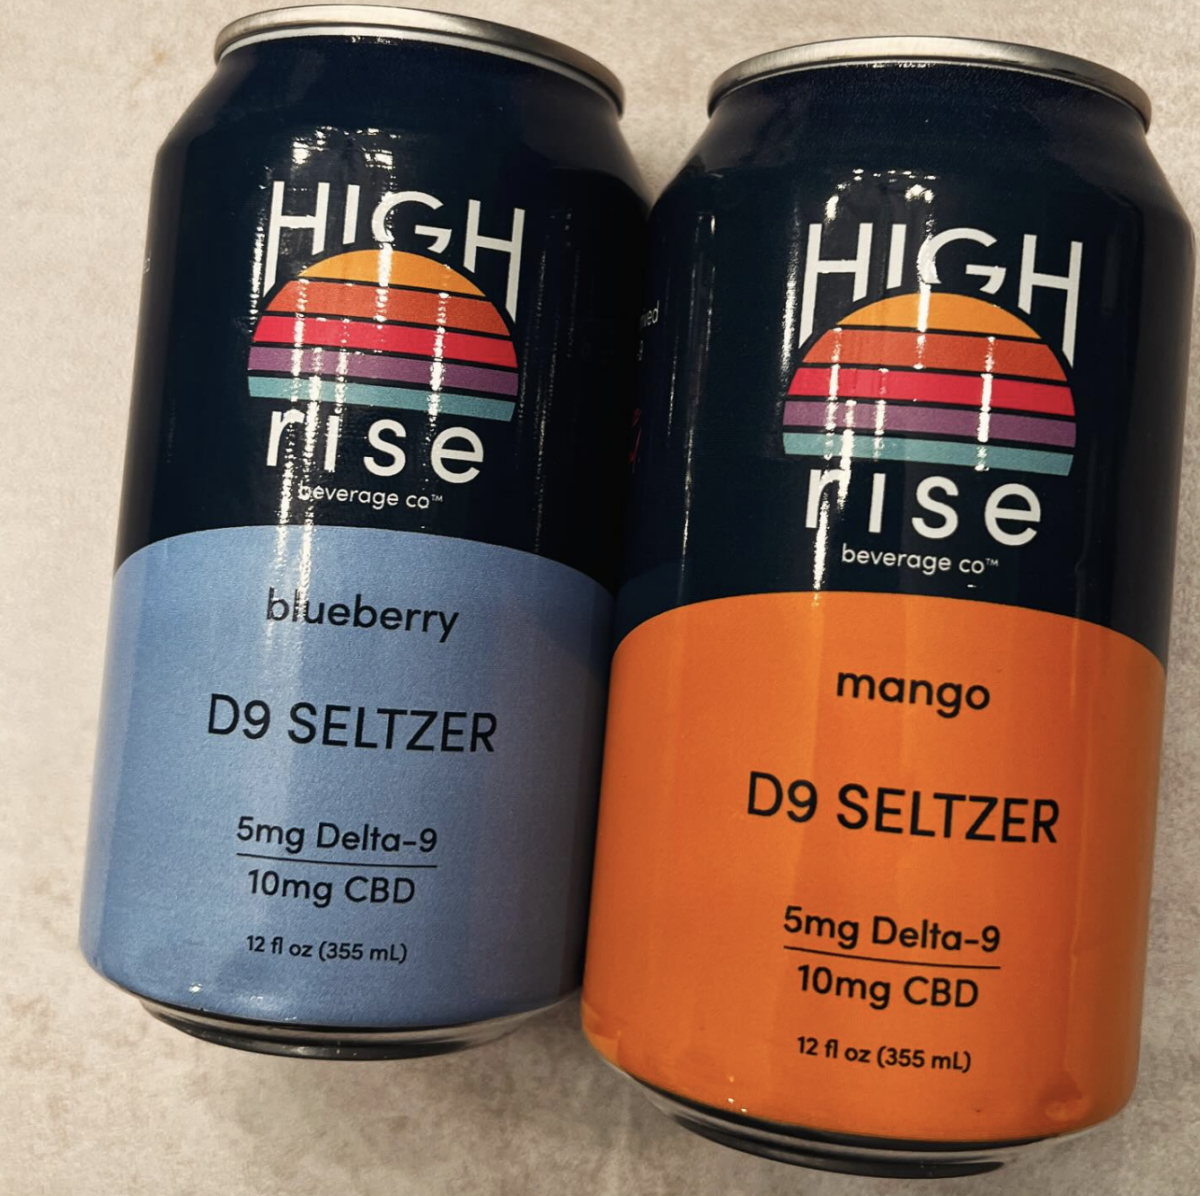 High Rise Bev Co Seltzers